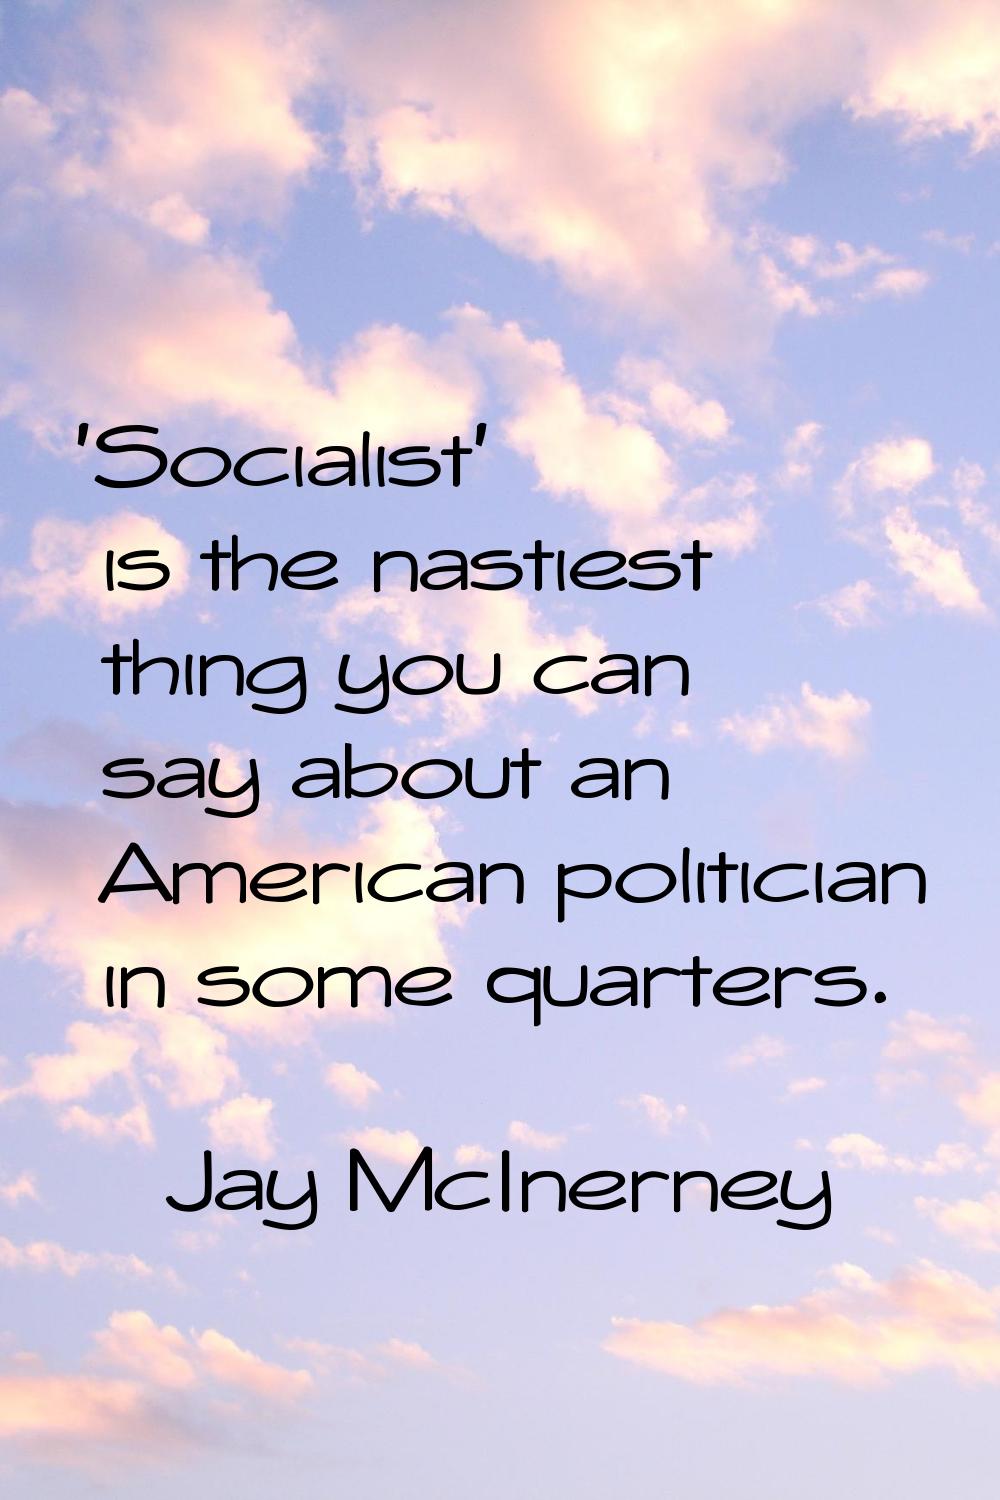 'Socialist' is the nastiest thing you can say about an American politician in some quarters.